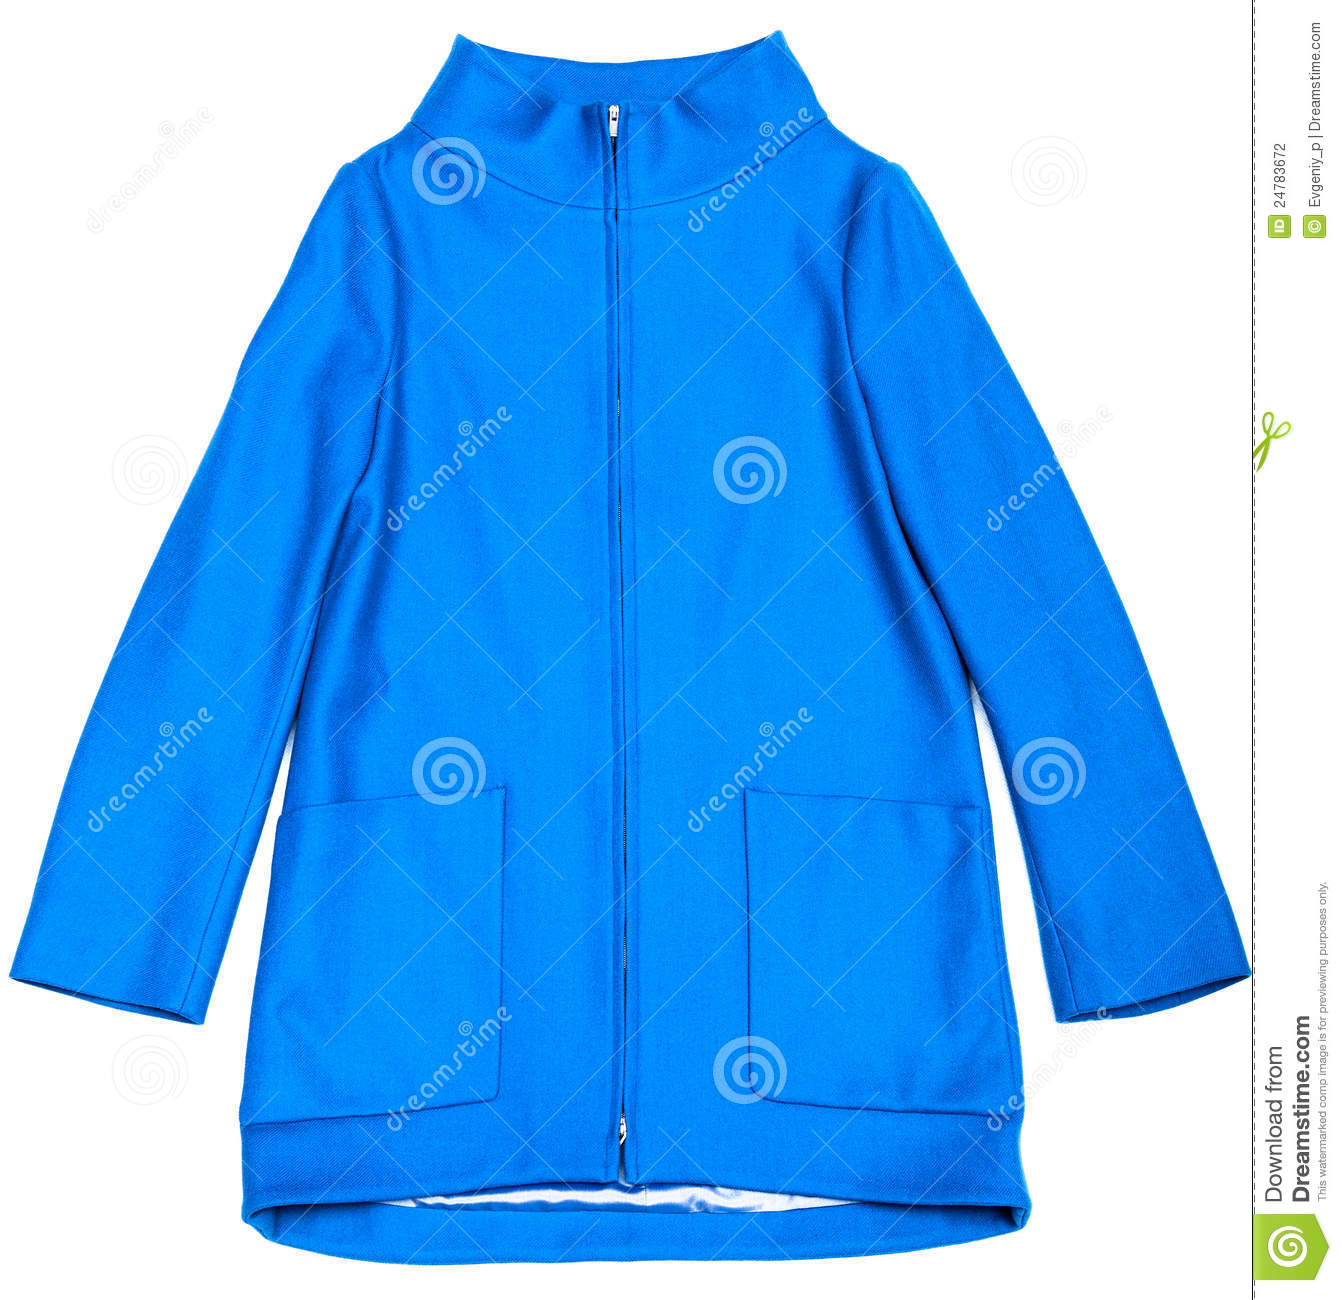 Blue Jacket With Pockets And A Zipper On A White Background 